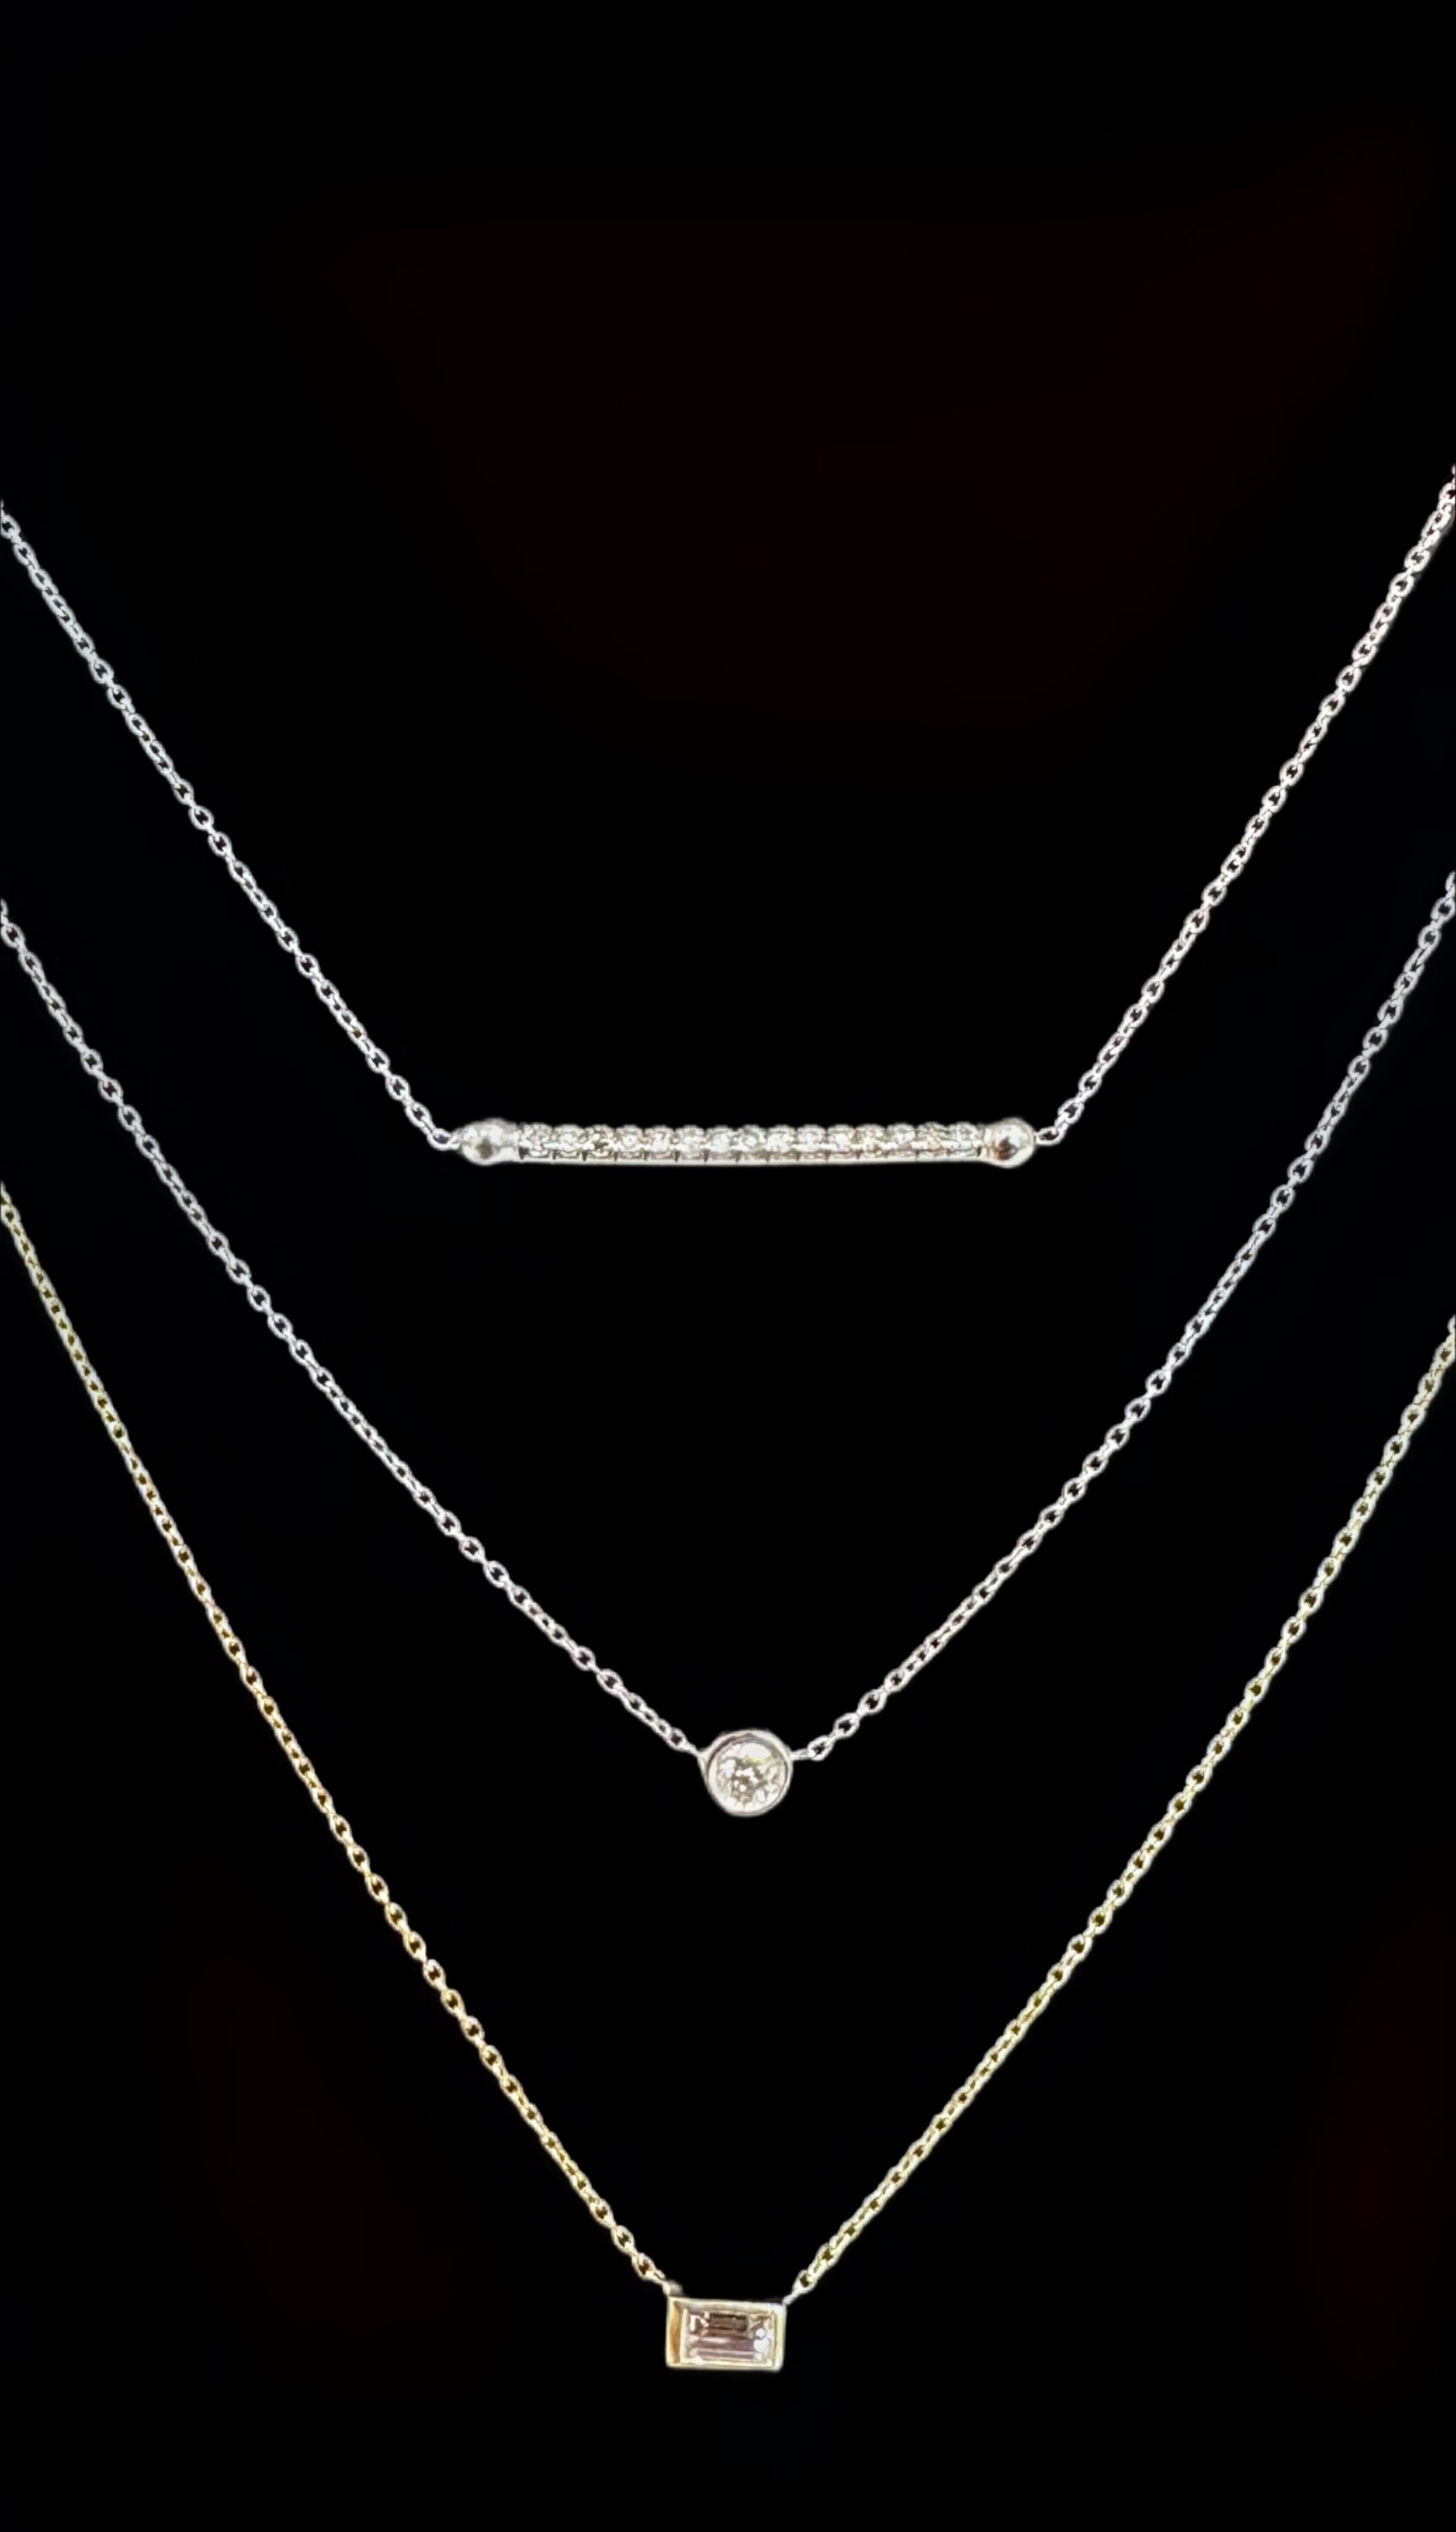 This dainty diamond baguette necklace is perfect for barely there look or for layering. Chain can be adjustable to 16 or 18 inches to serve this purpose. 